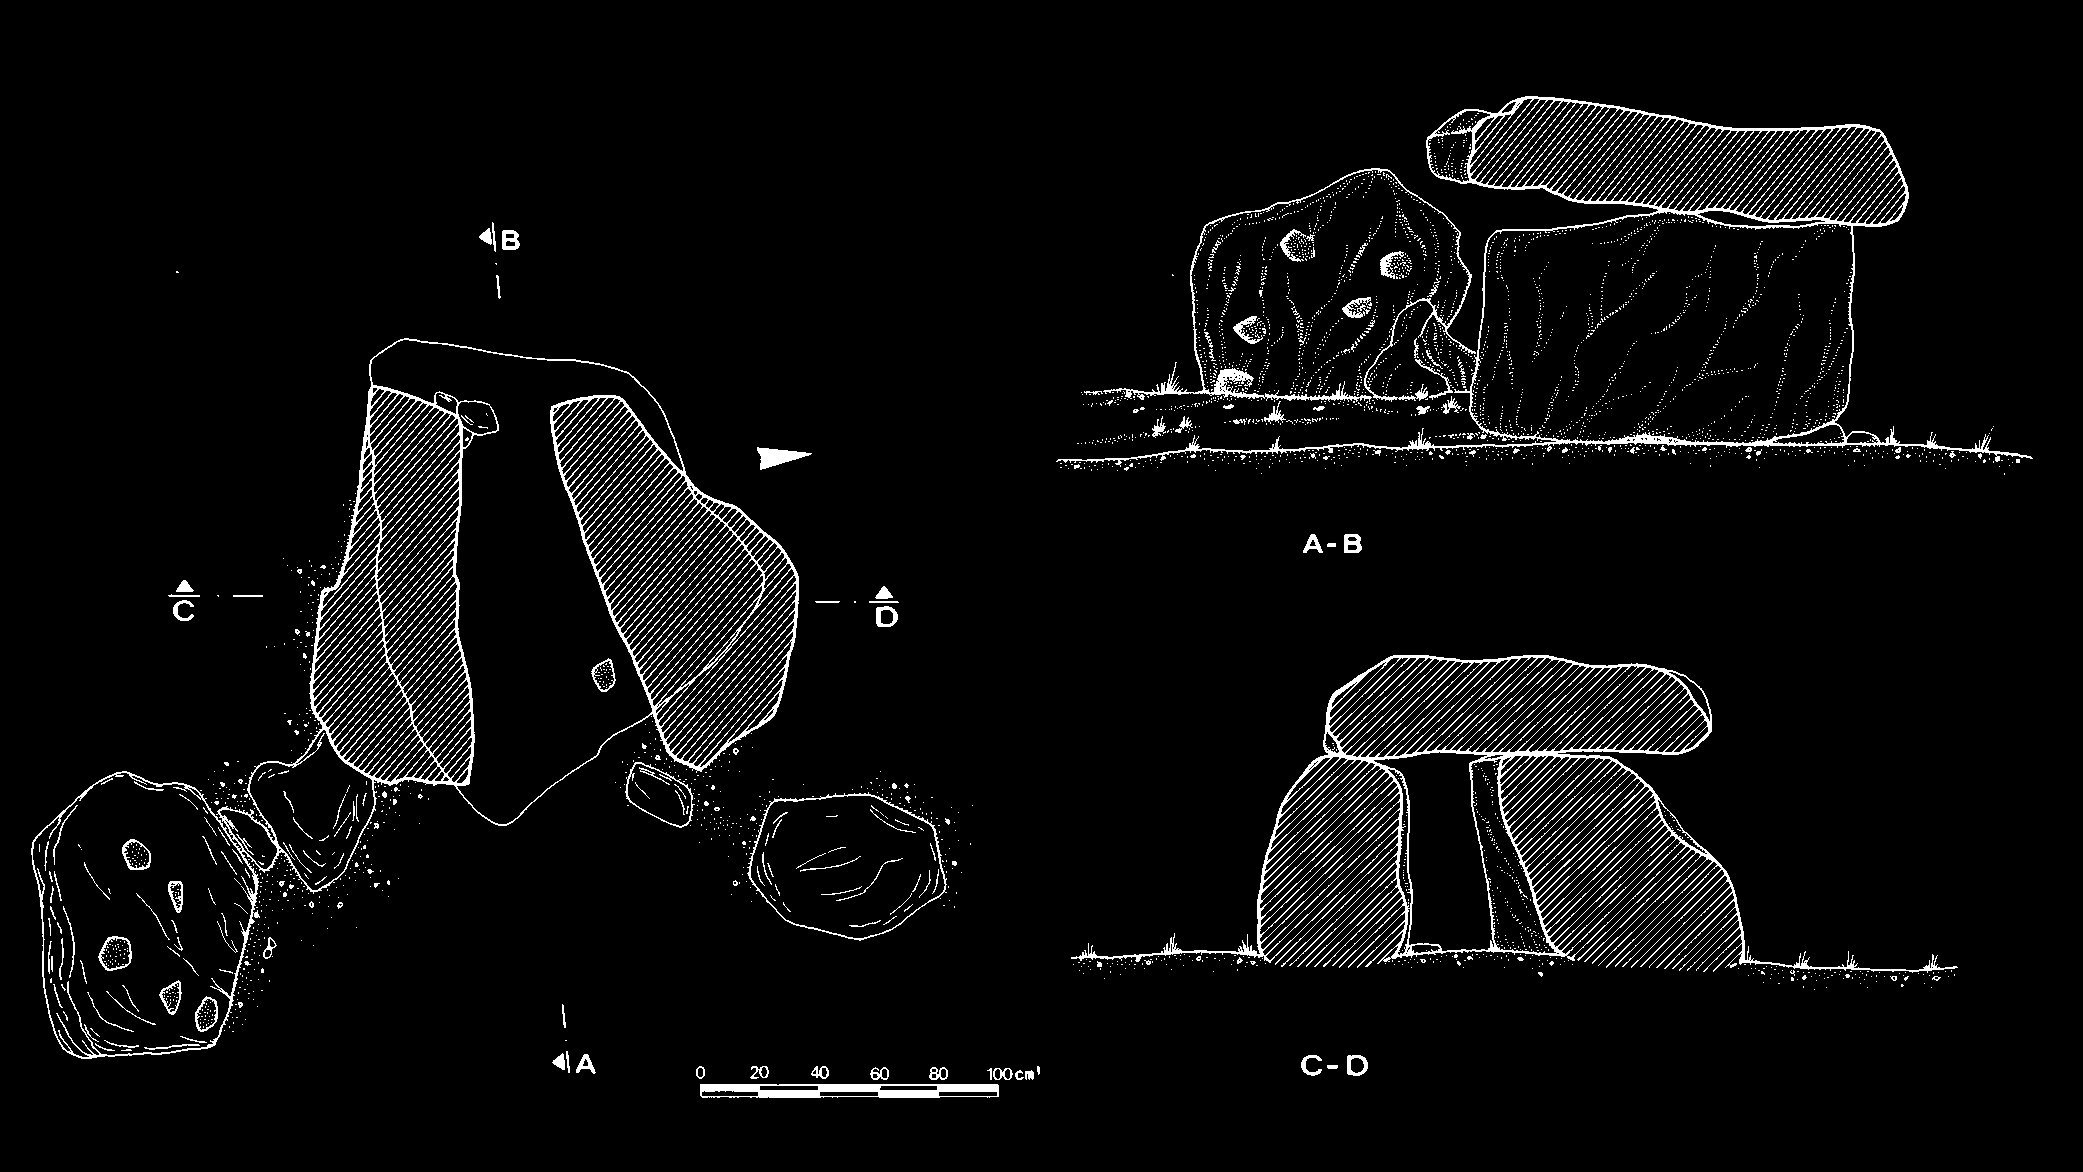 Fig. 9. Macomer, Dolmen Aeddo. Fig. 10. Macomer, Dolmen Aeddo. Fig. 11.